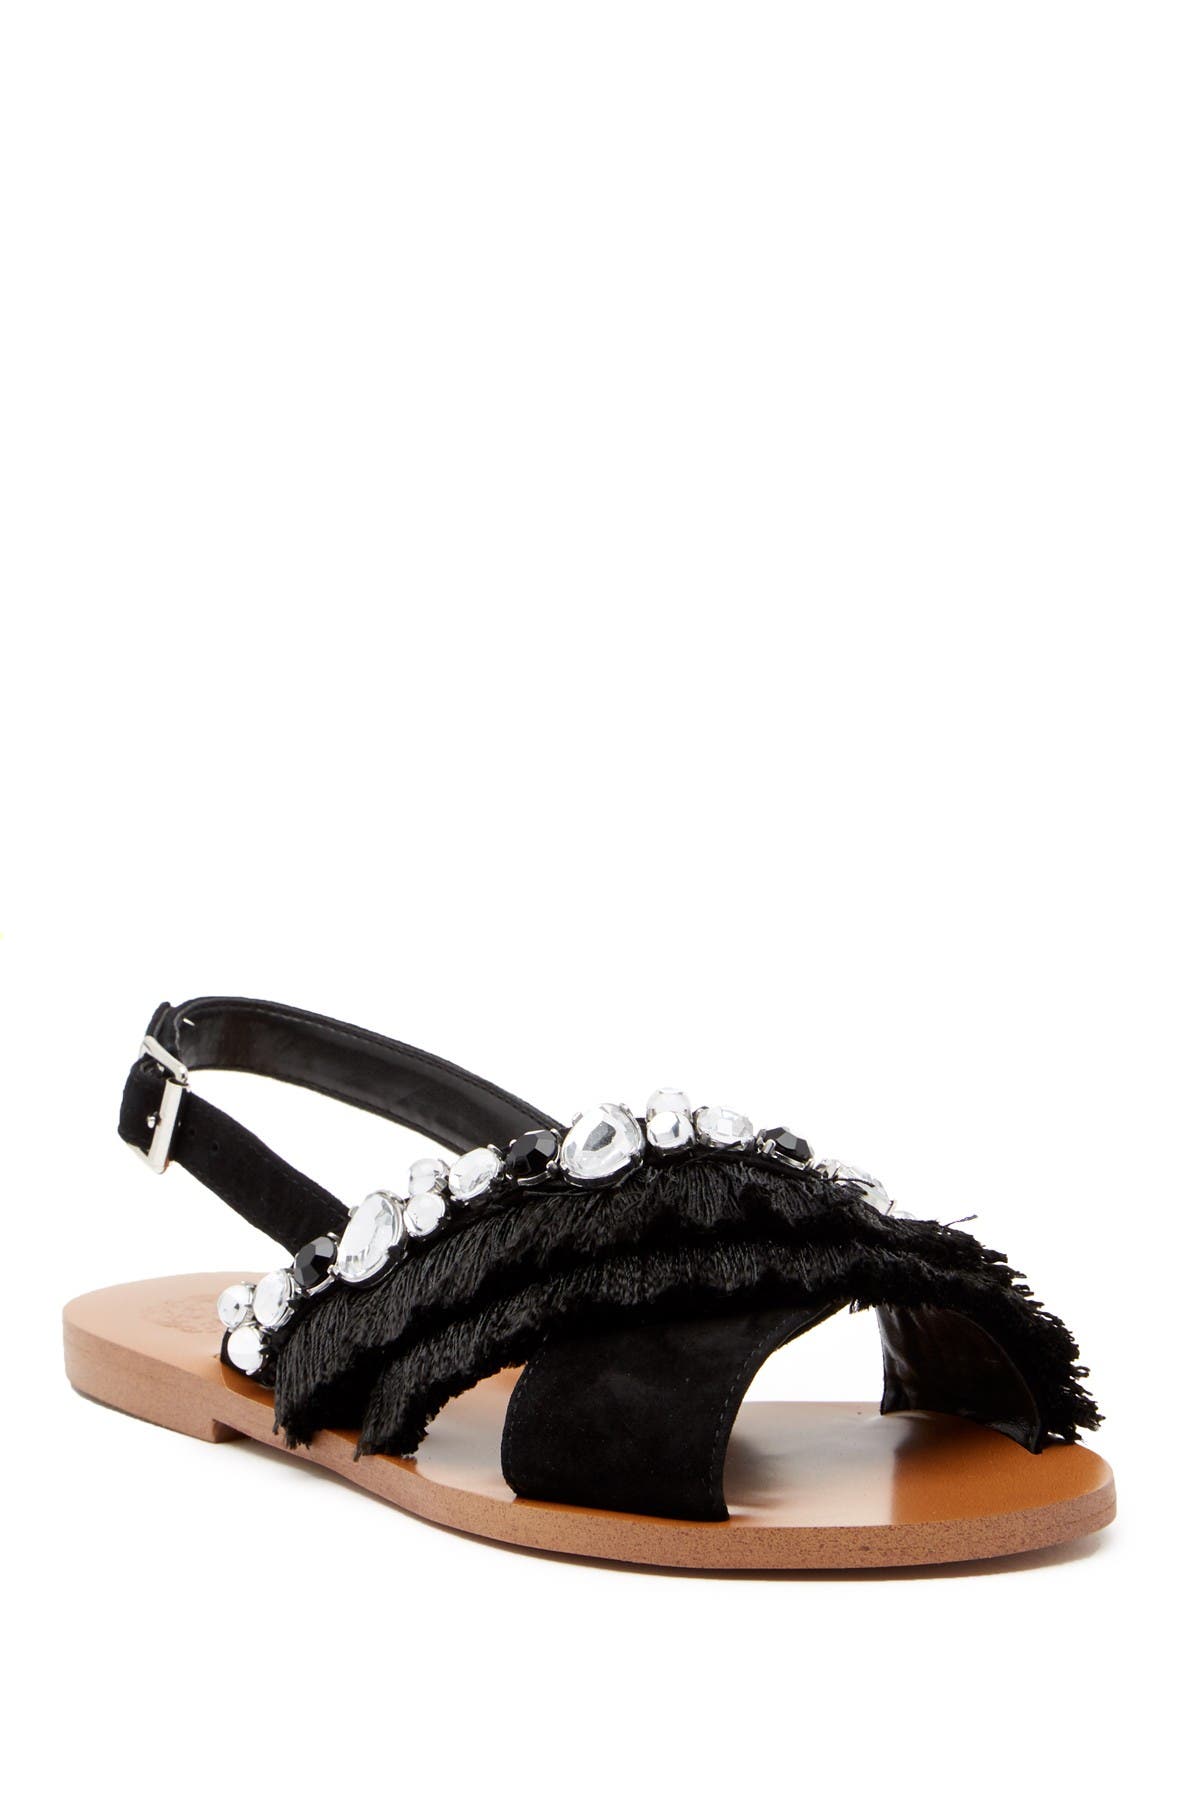 vince camuto fringed suede sandals